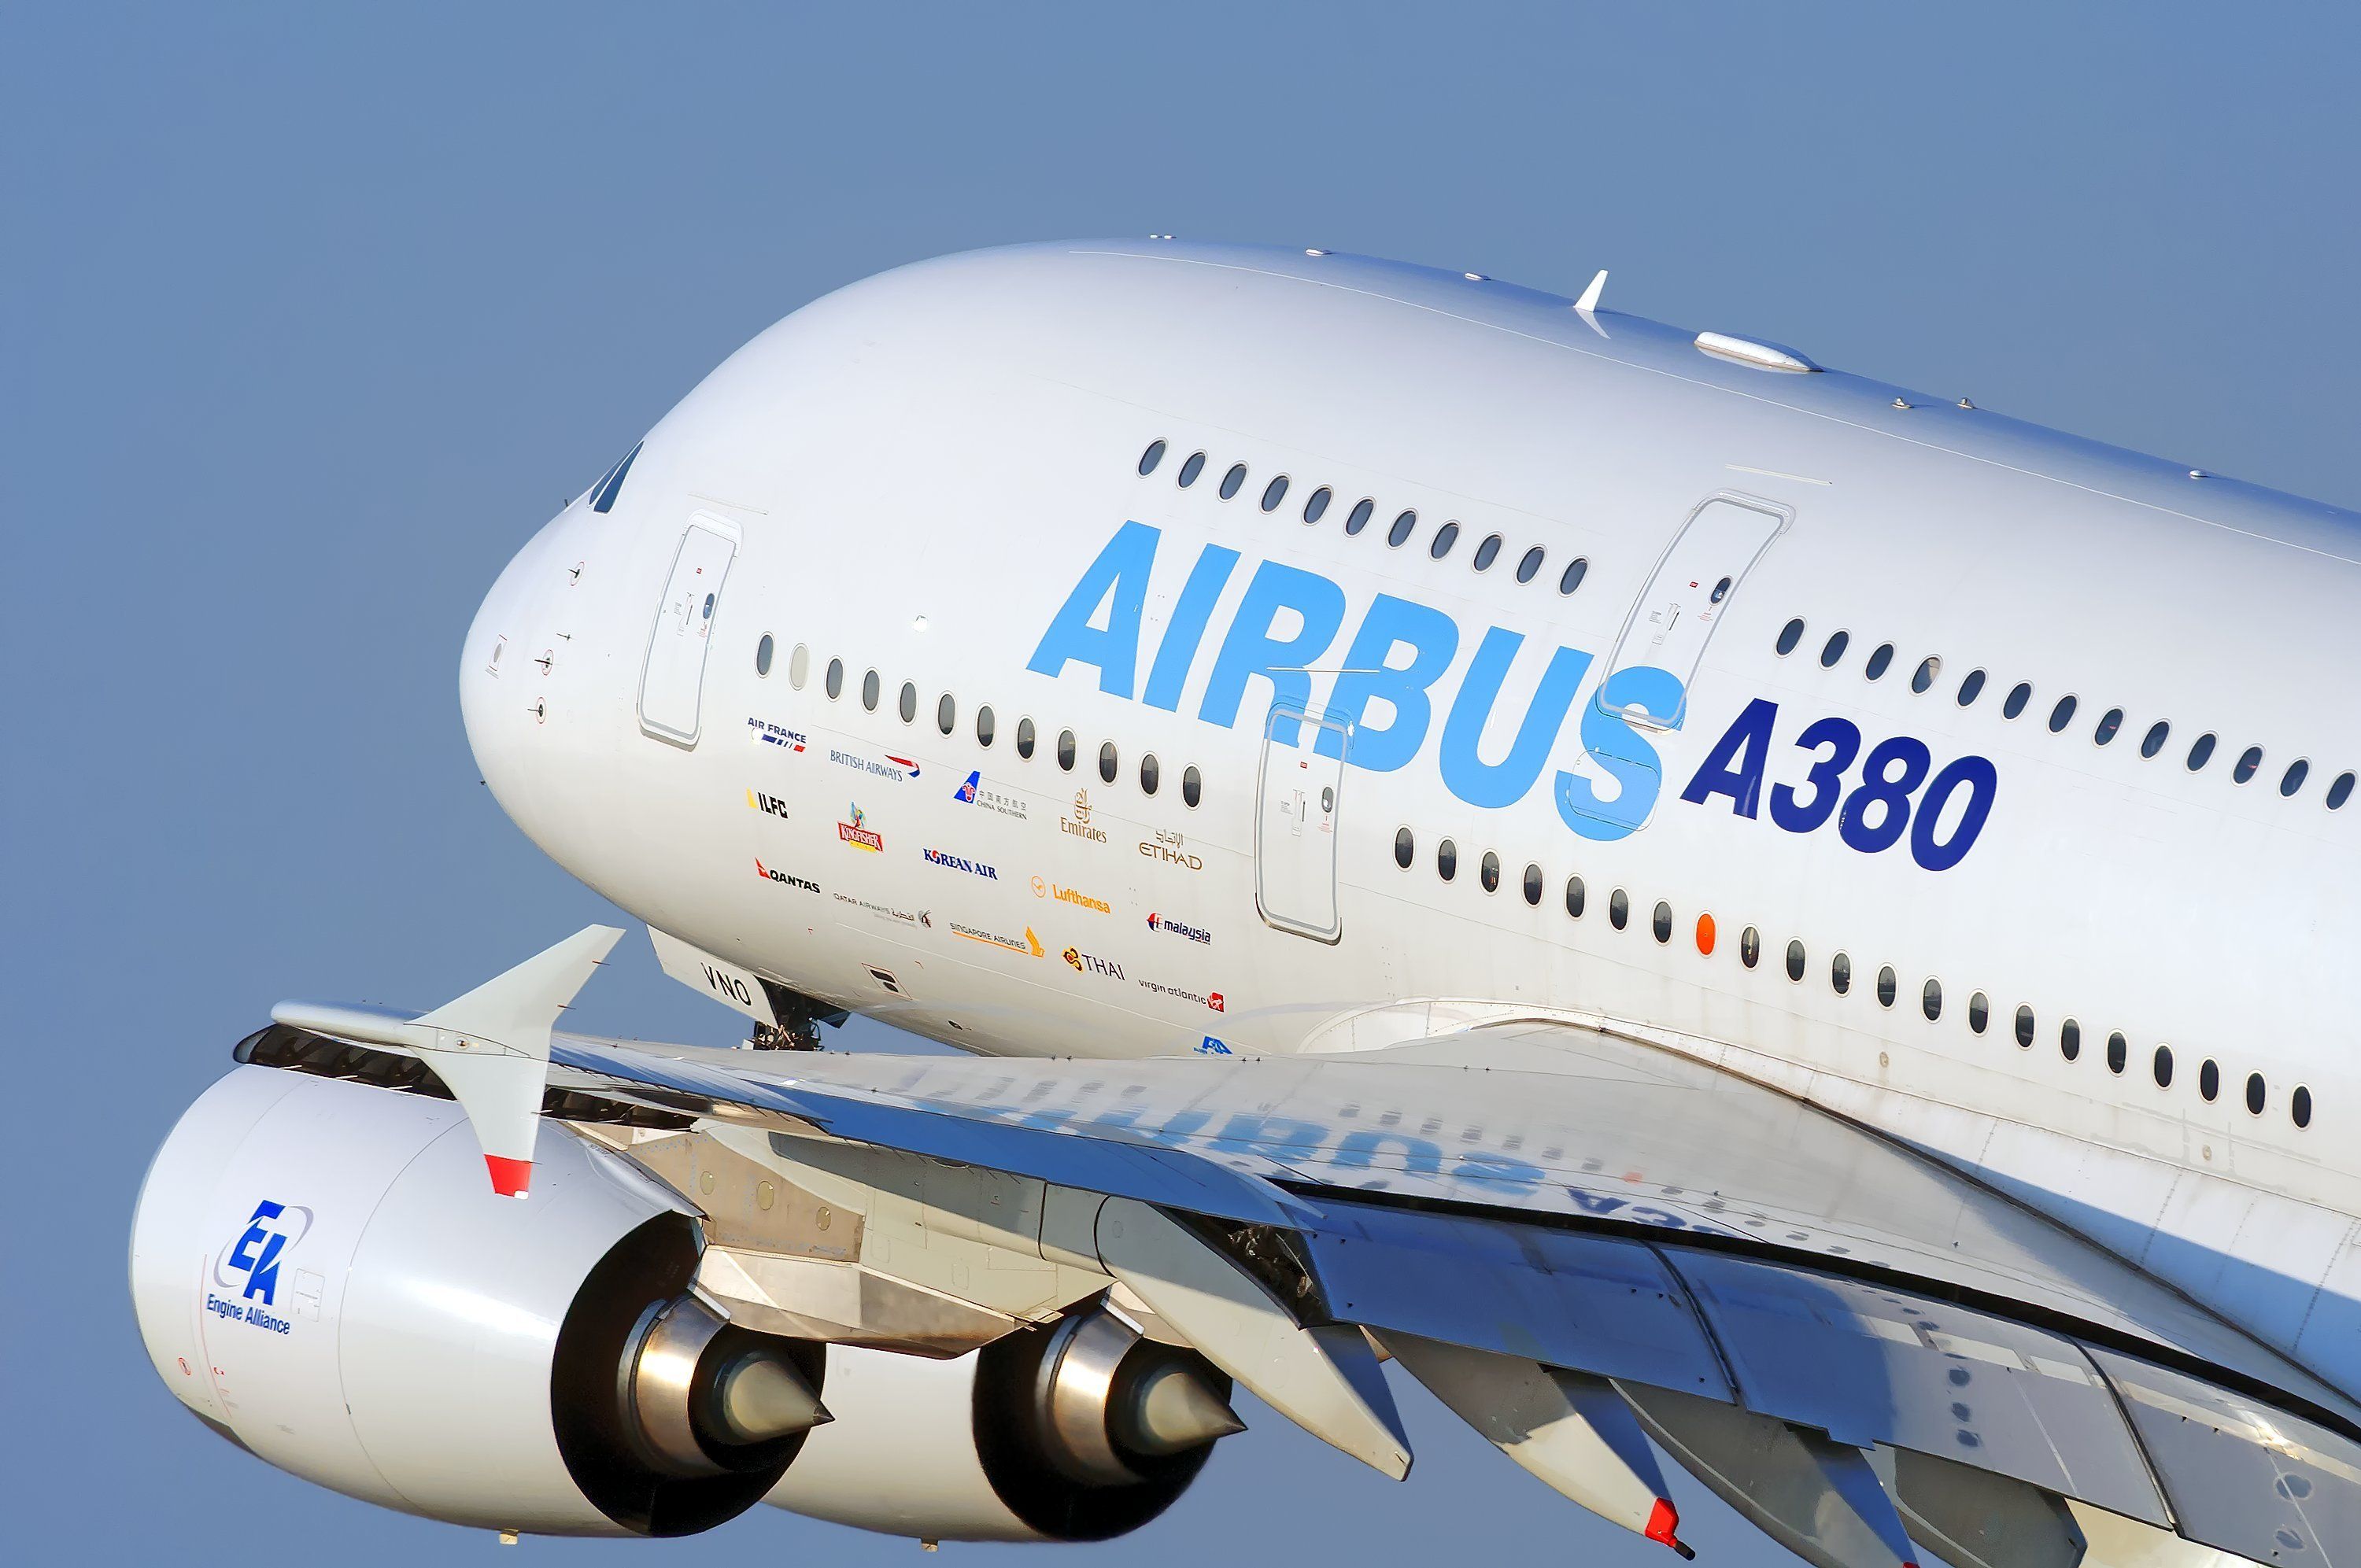 An Airbus A380 in house livery taking off from Dubai International Airport.